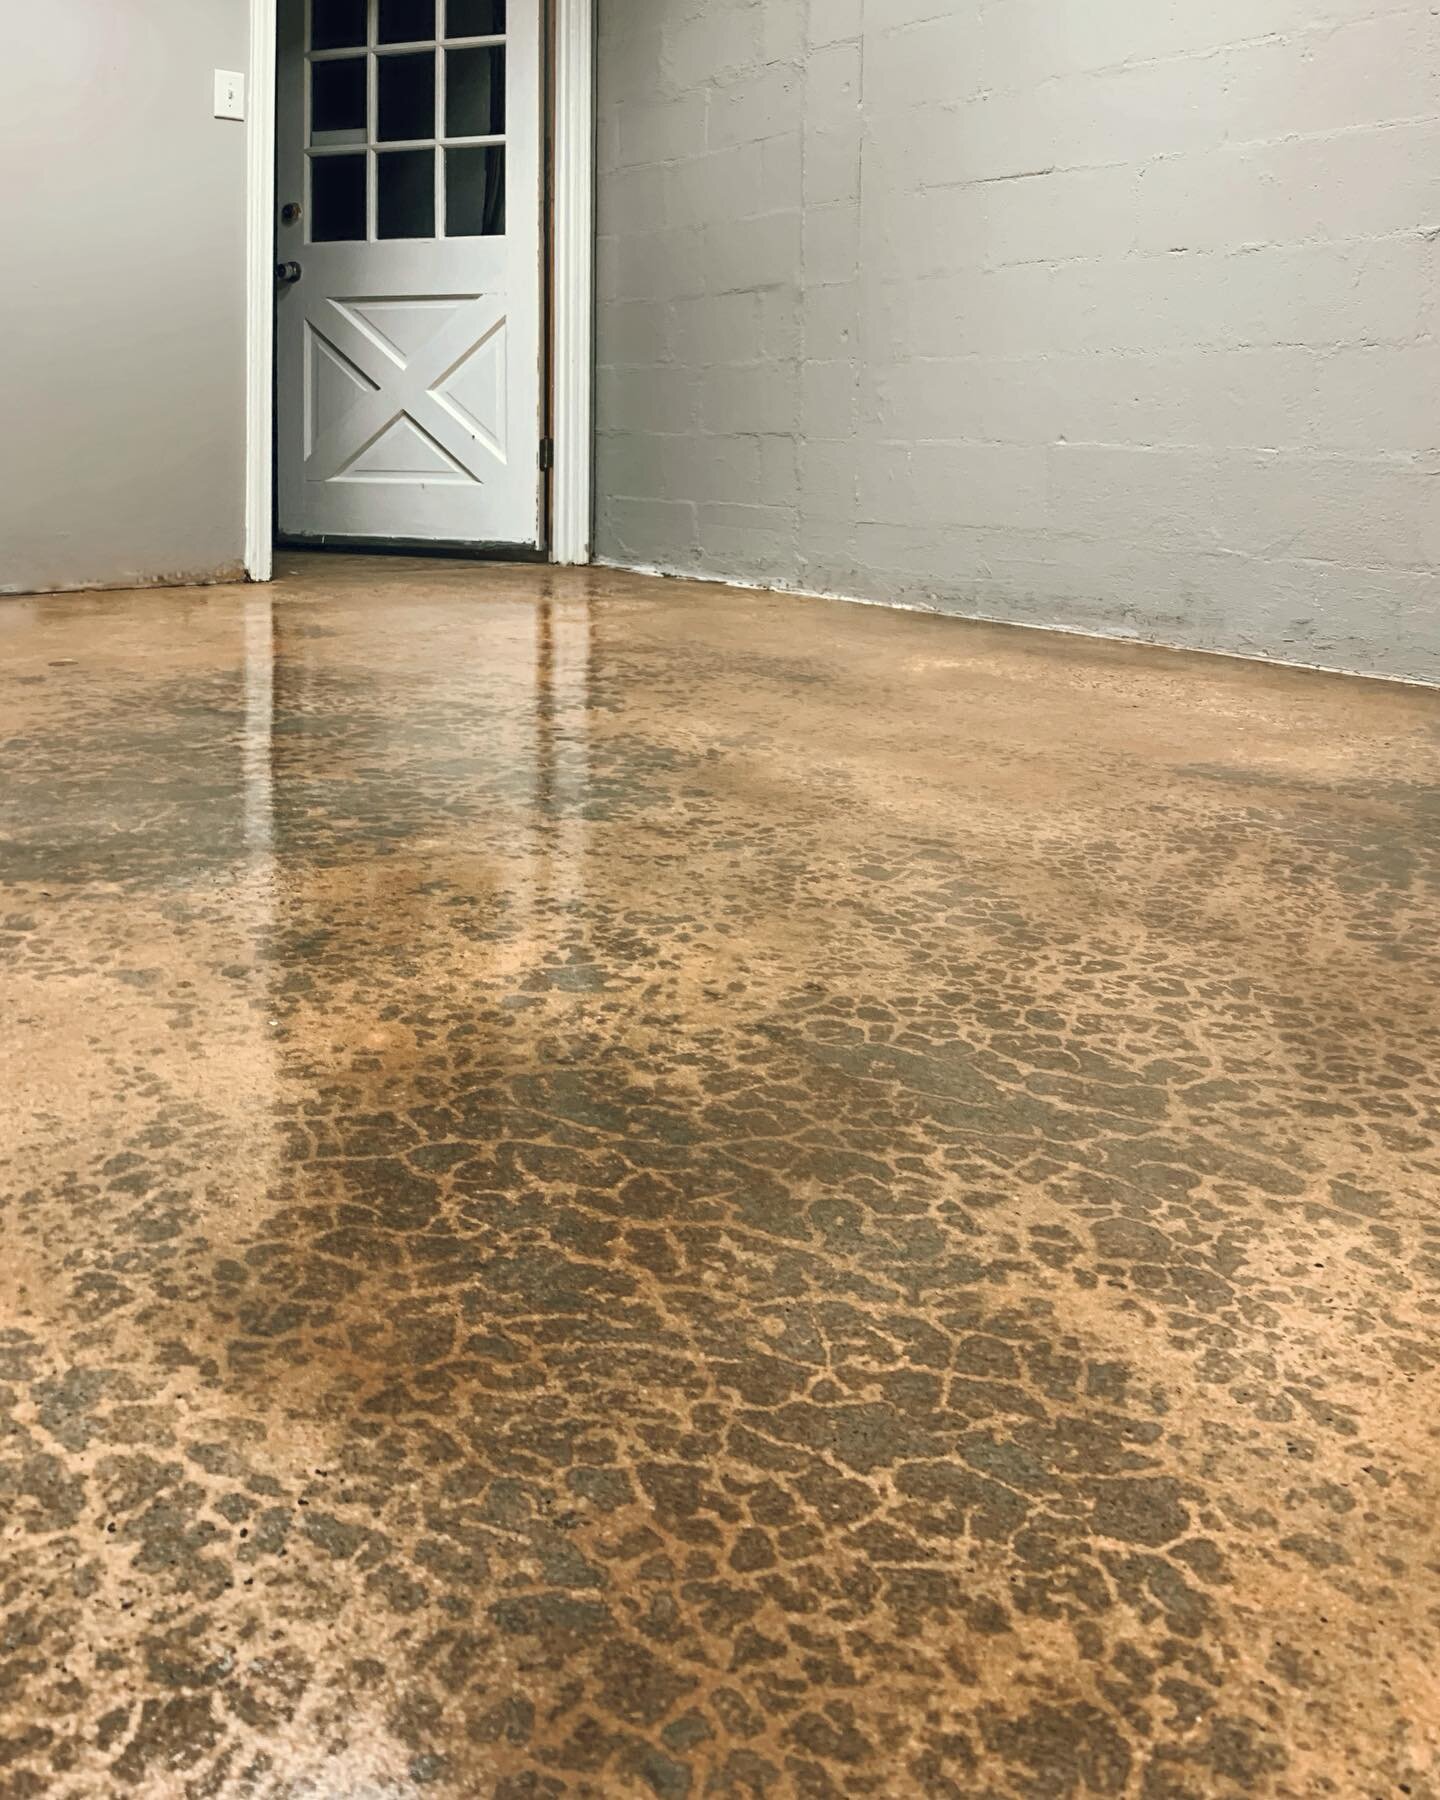 Sealed concrete comes in all colors. 🎨 What does your concrete canvas look like? 

Meeting both aesthetic and functionality goals, sealing your concrete ensures your slab is dense and able to repel water, oil, and other surface contamination.

See i